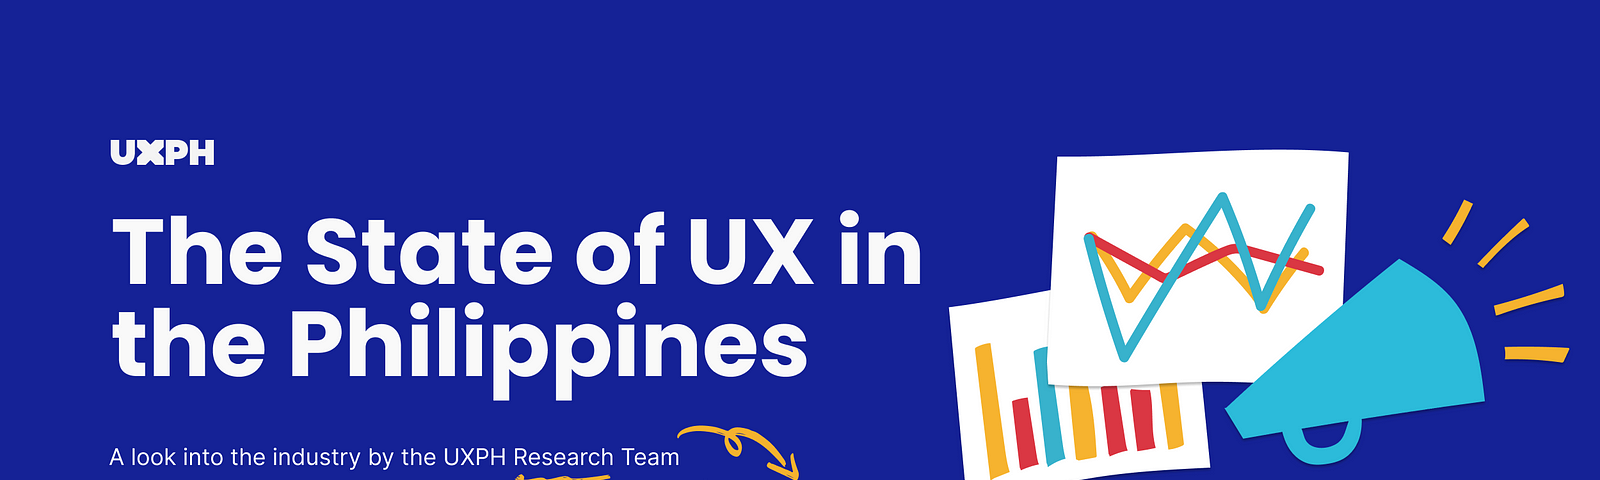 The State of UX in the Philippines: A look into the industry by the UXPH Research Team and the first study by UXPH